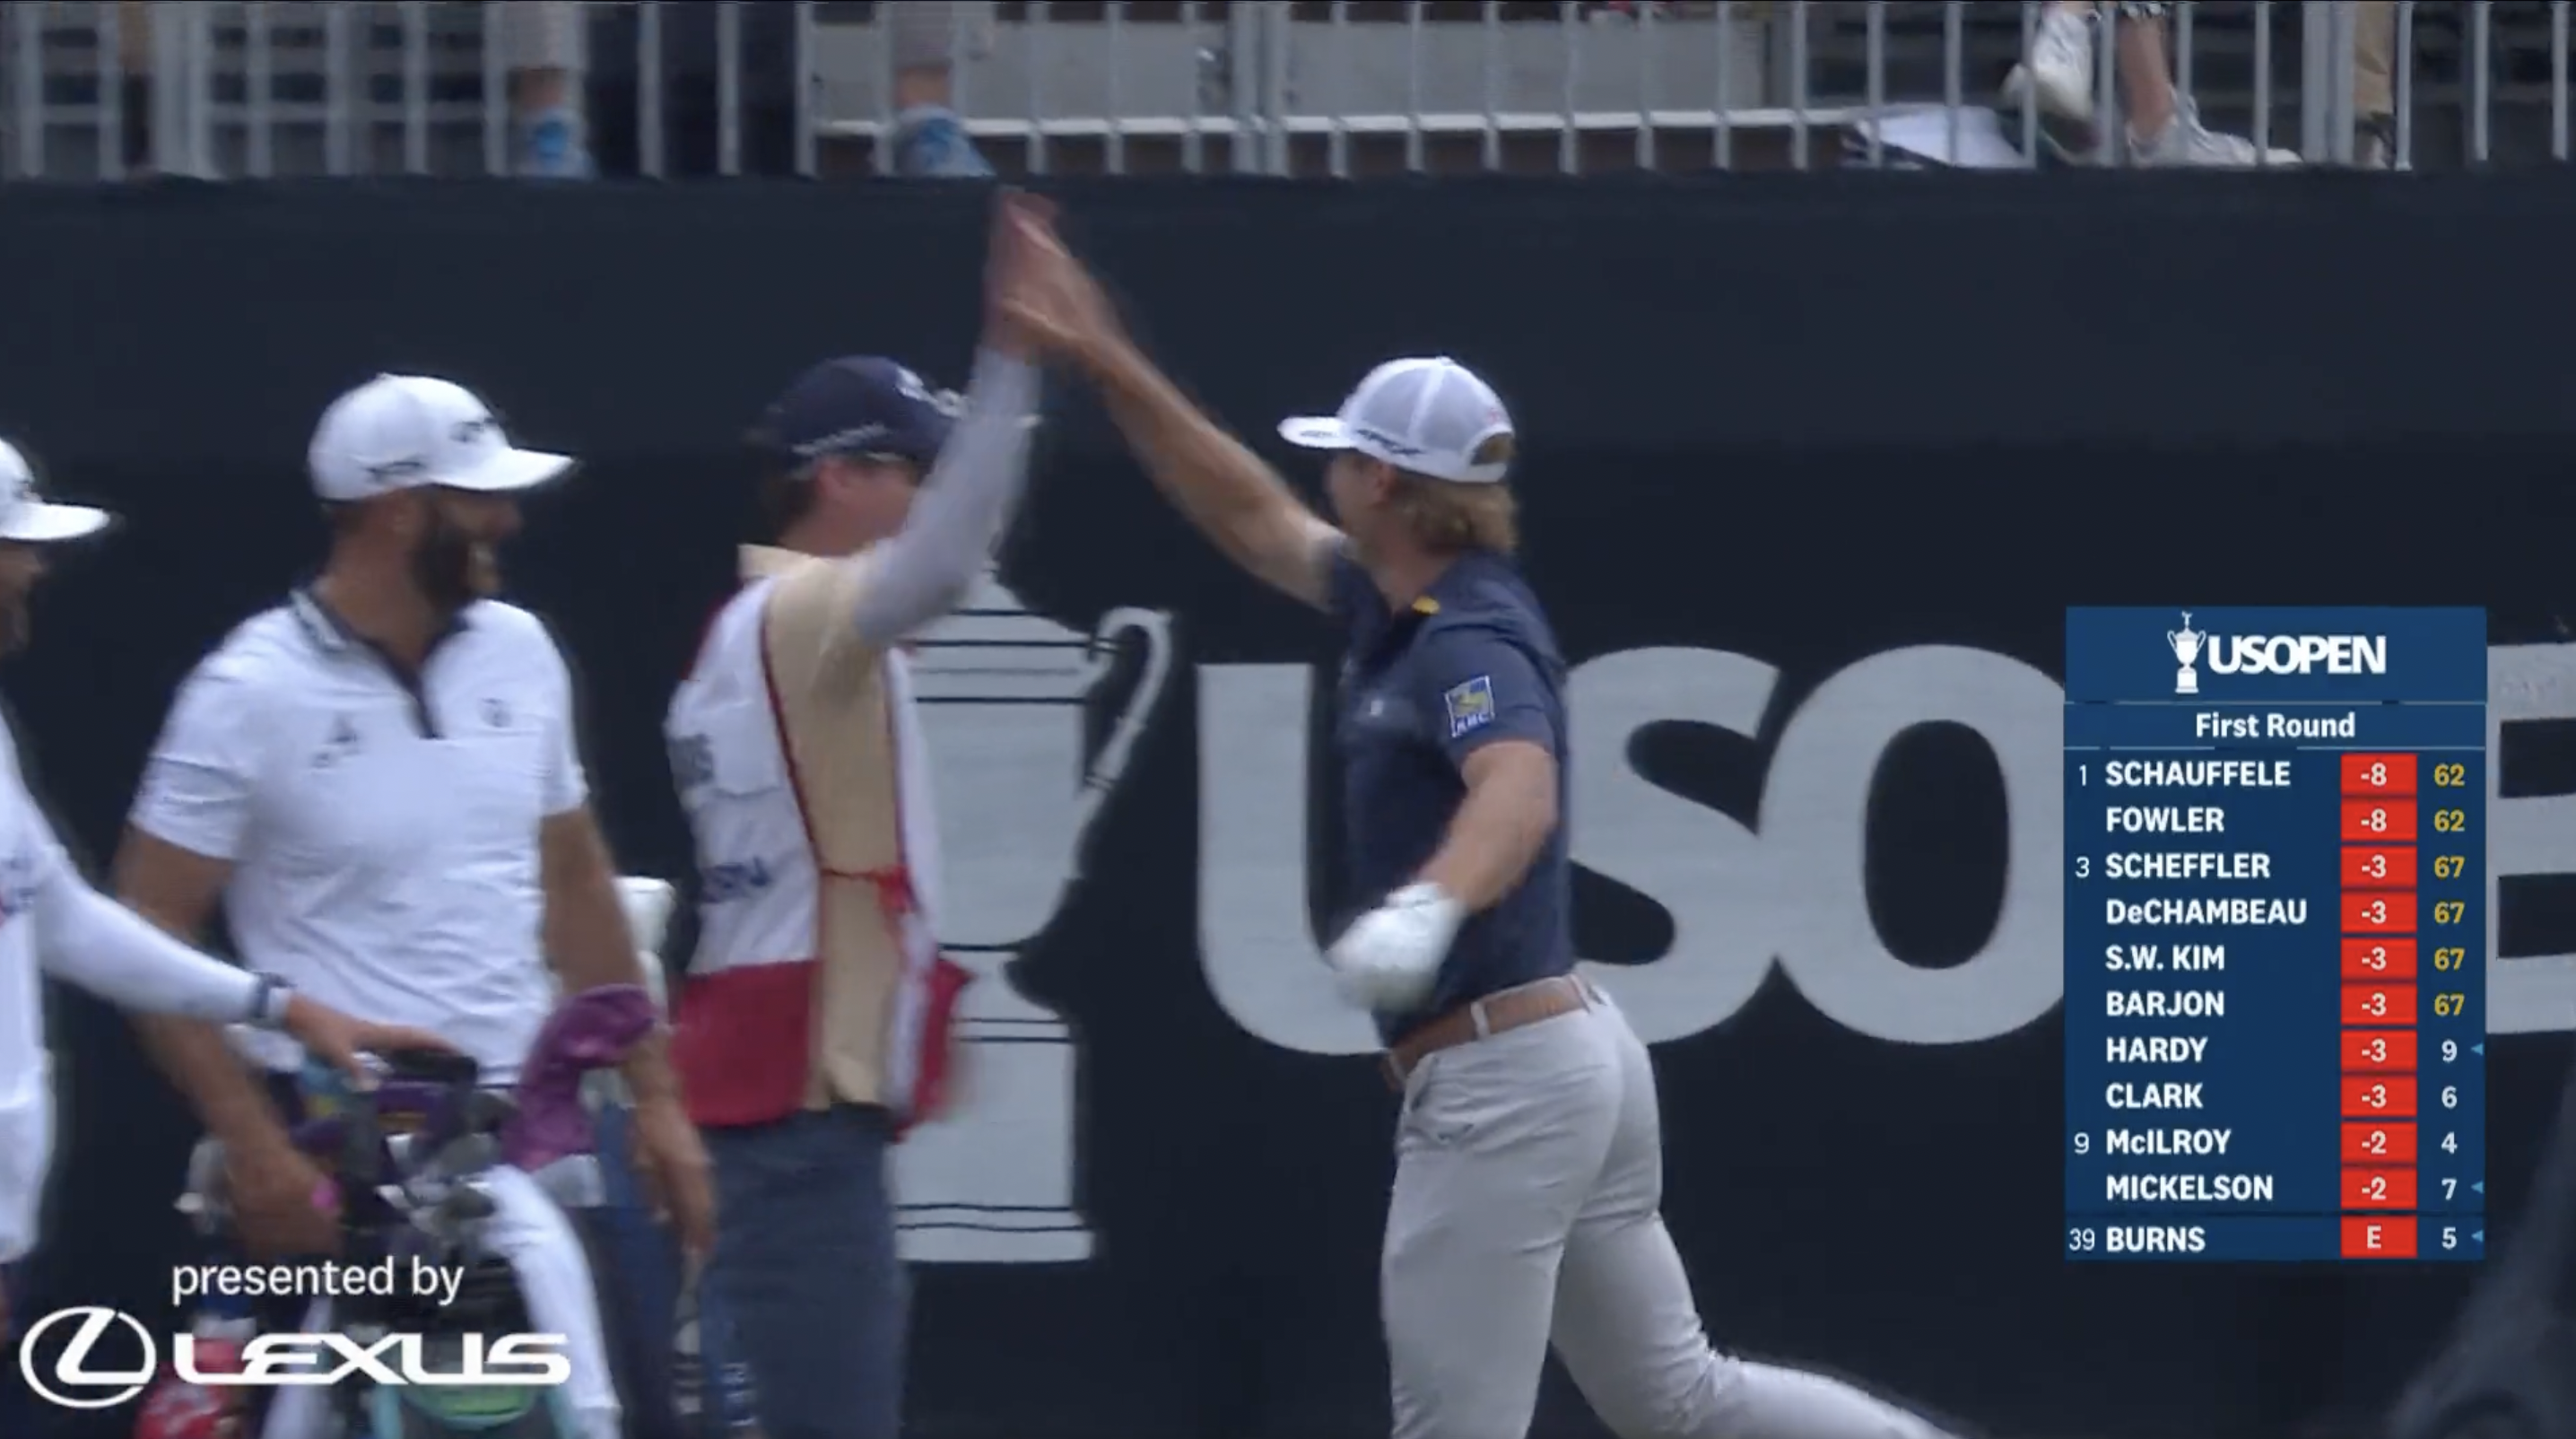 PGA Tour star Sam Burns high fives his caddie after recording a hole-in-one at the U.S. Open.